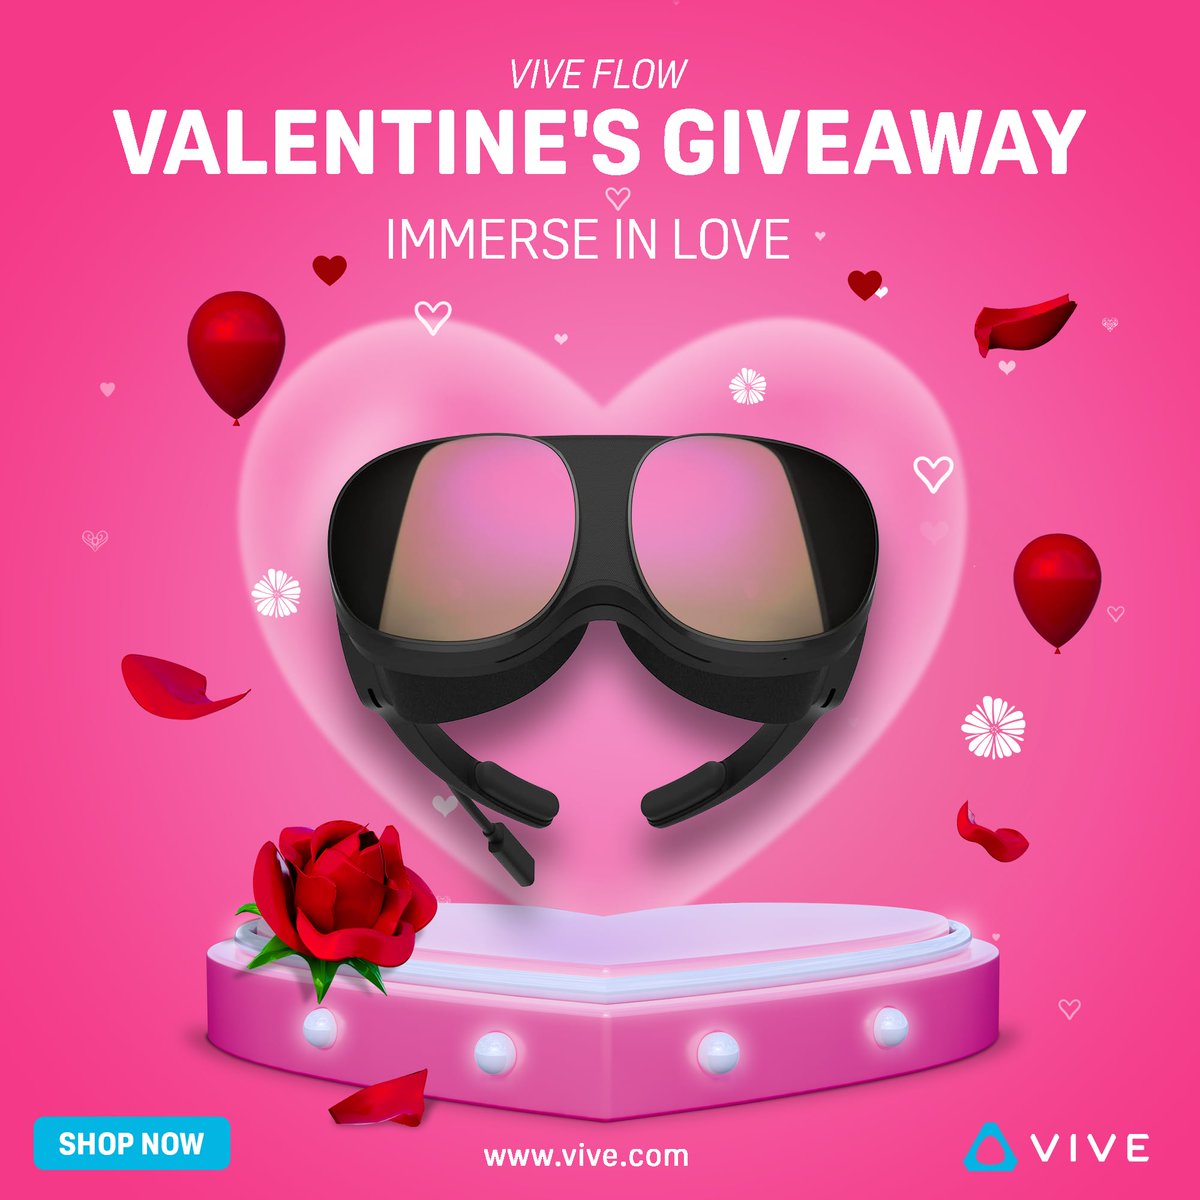 Have a special someone who you'd love to share VR adventures with? 🥰 We're giving away a pair of VIVE Flow headsets to one lucky couple! 😎😎 🔁 Retweet this post to enter.